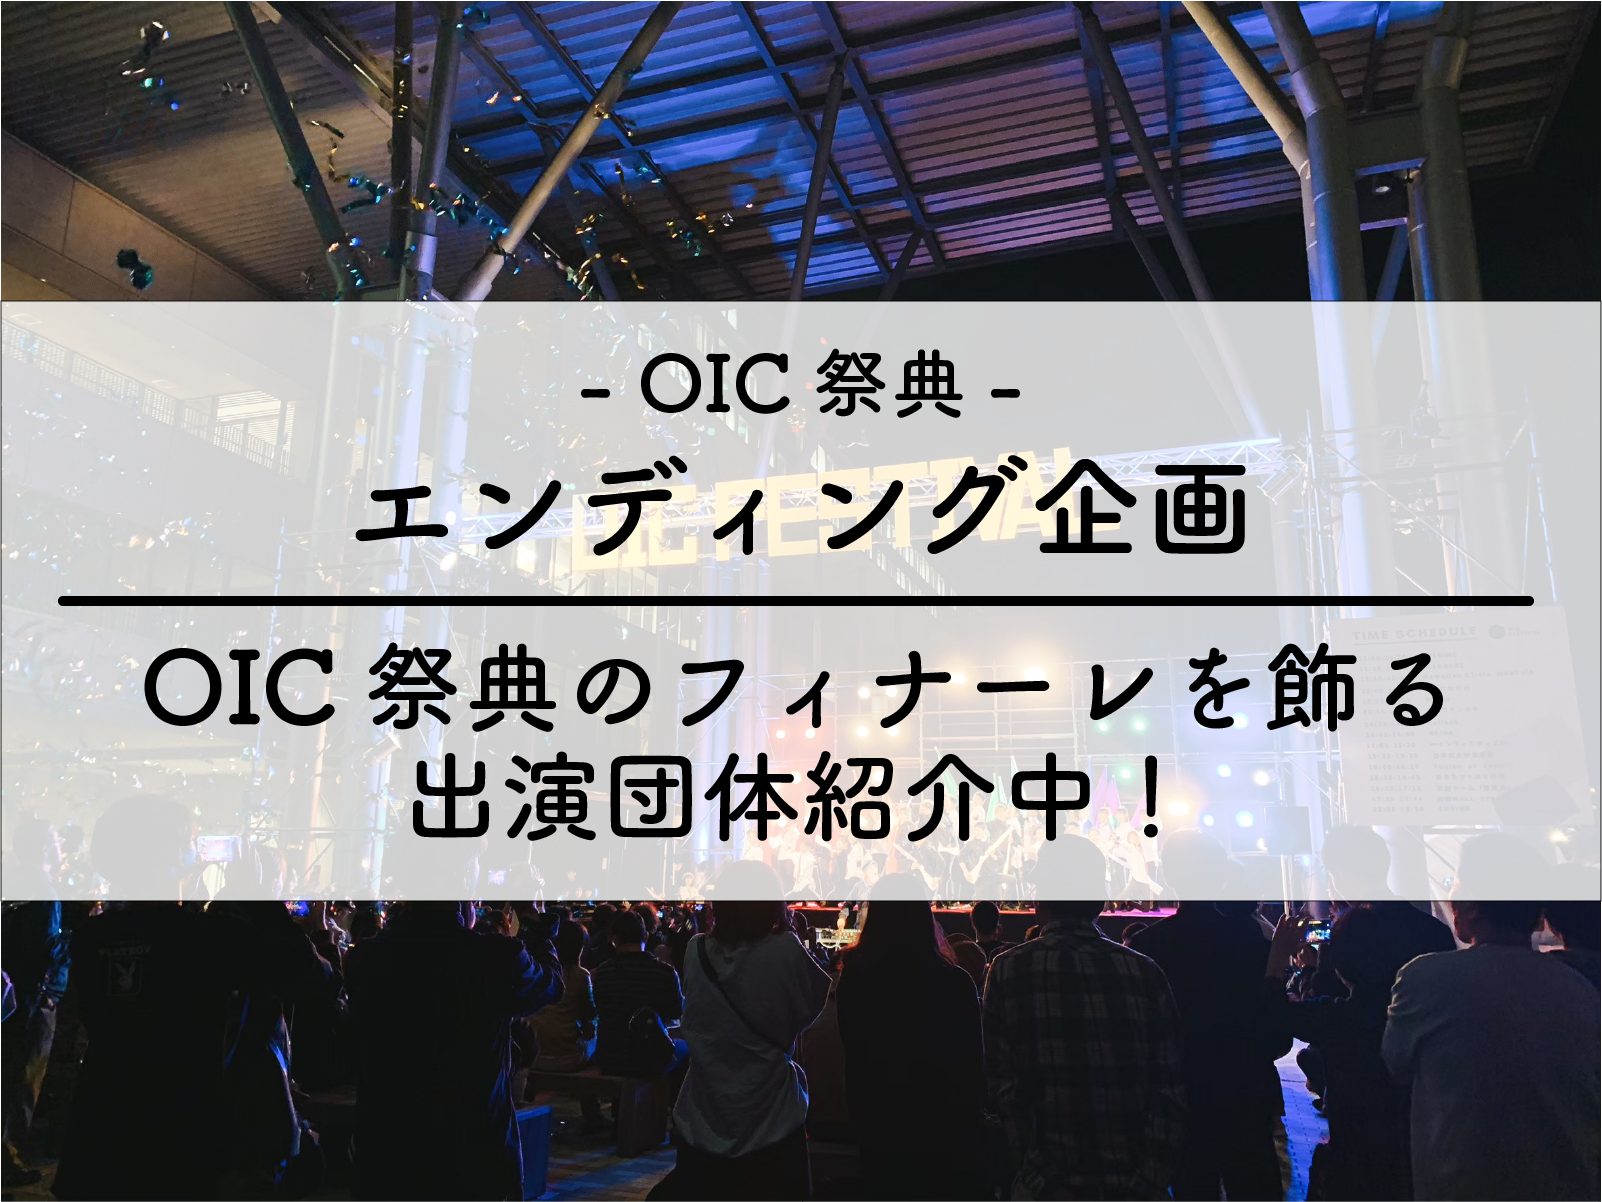 OIC祭典エンディング企画 in OICアリーナ